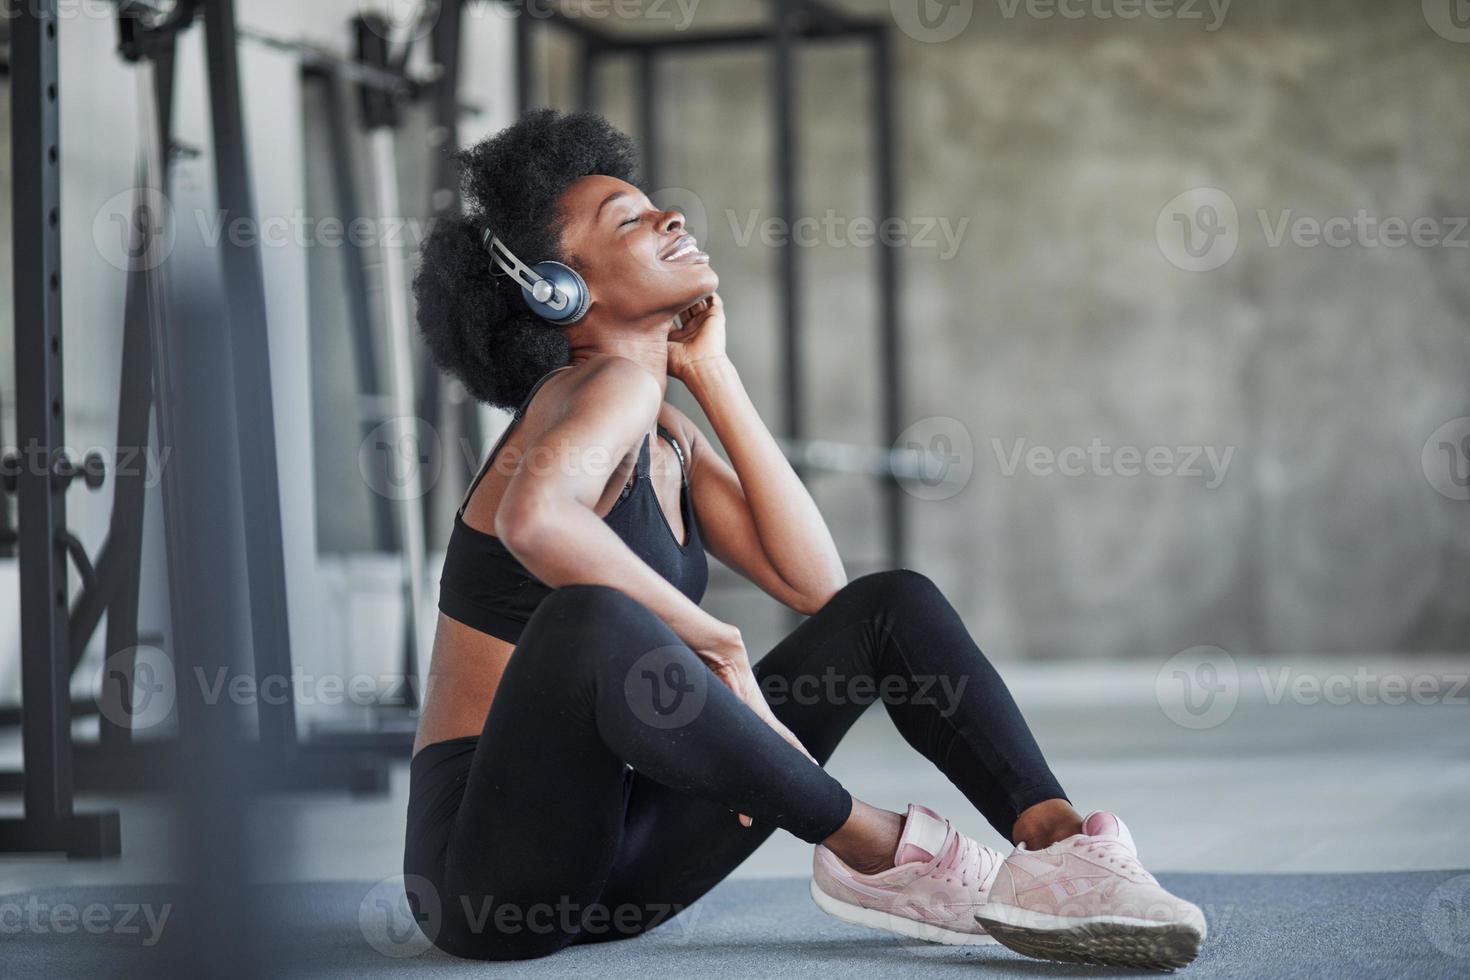 https://static.vecteezy.com/system/resources/previews/015/196/285/non_2x/break-after-workout-african-american-woman-with-curly-hair-and-in-sportive-clothes-have-fitness-day-in-the-gym-photo.jpg